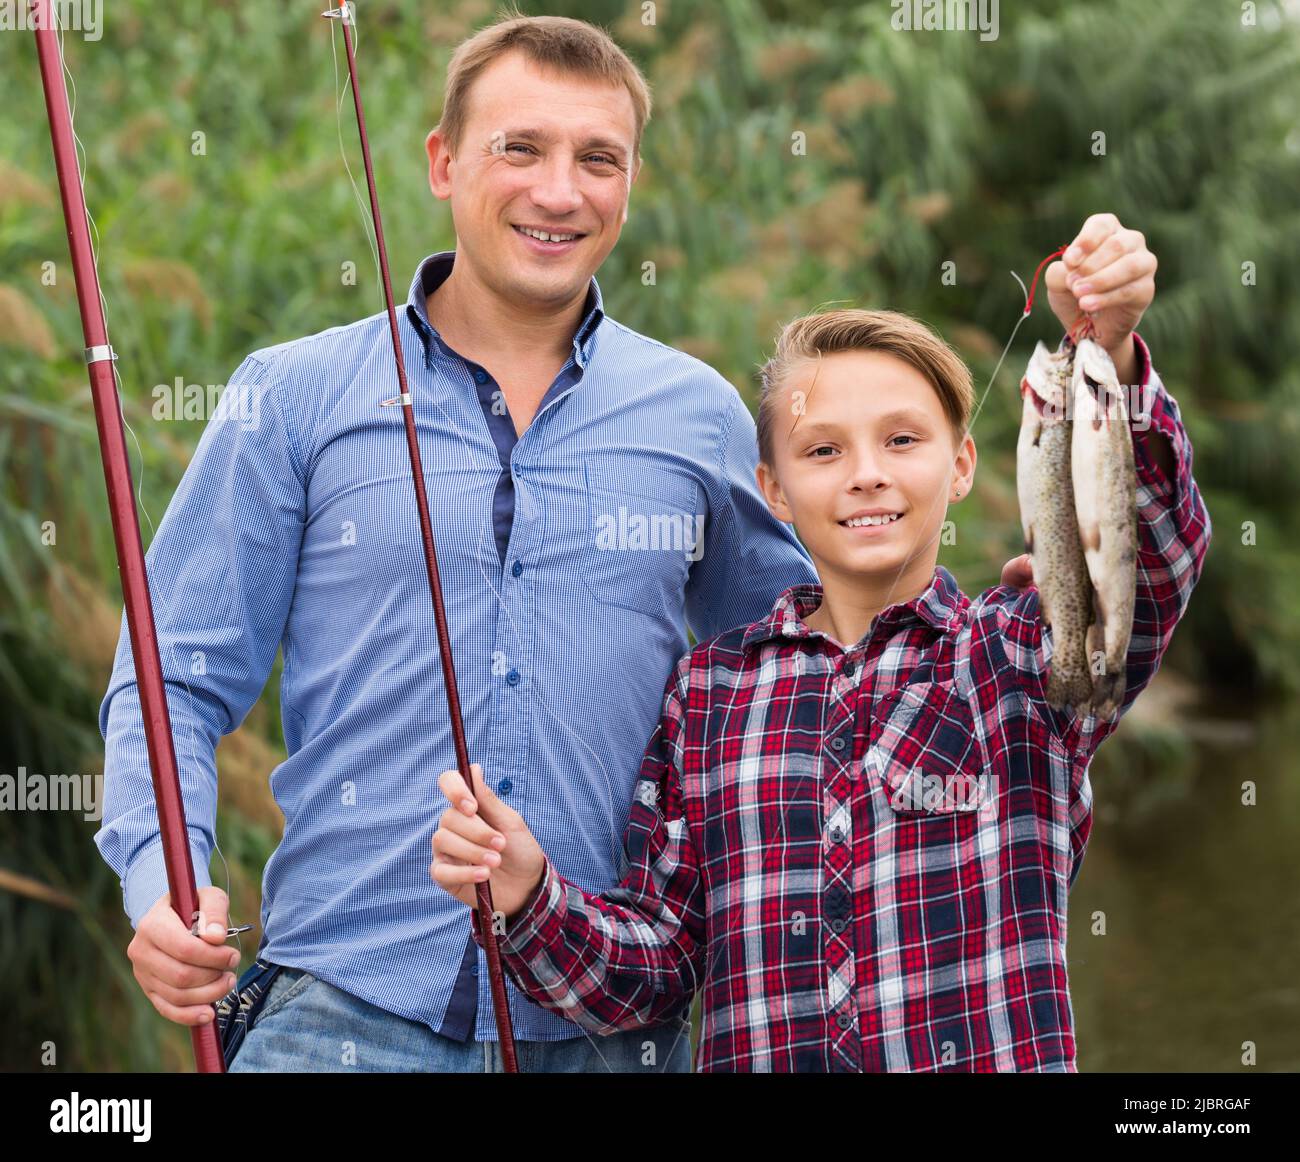 Glad father with son looking at fish on hook Stock Photo